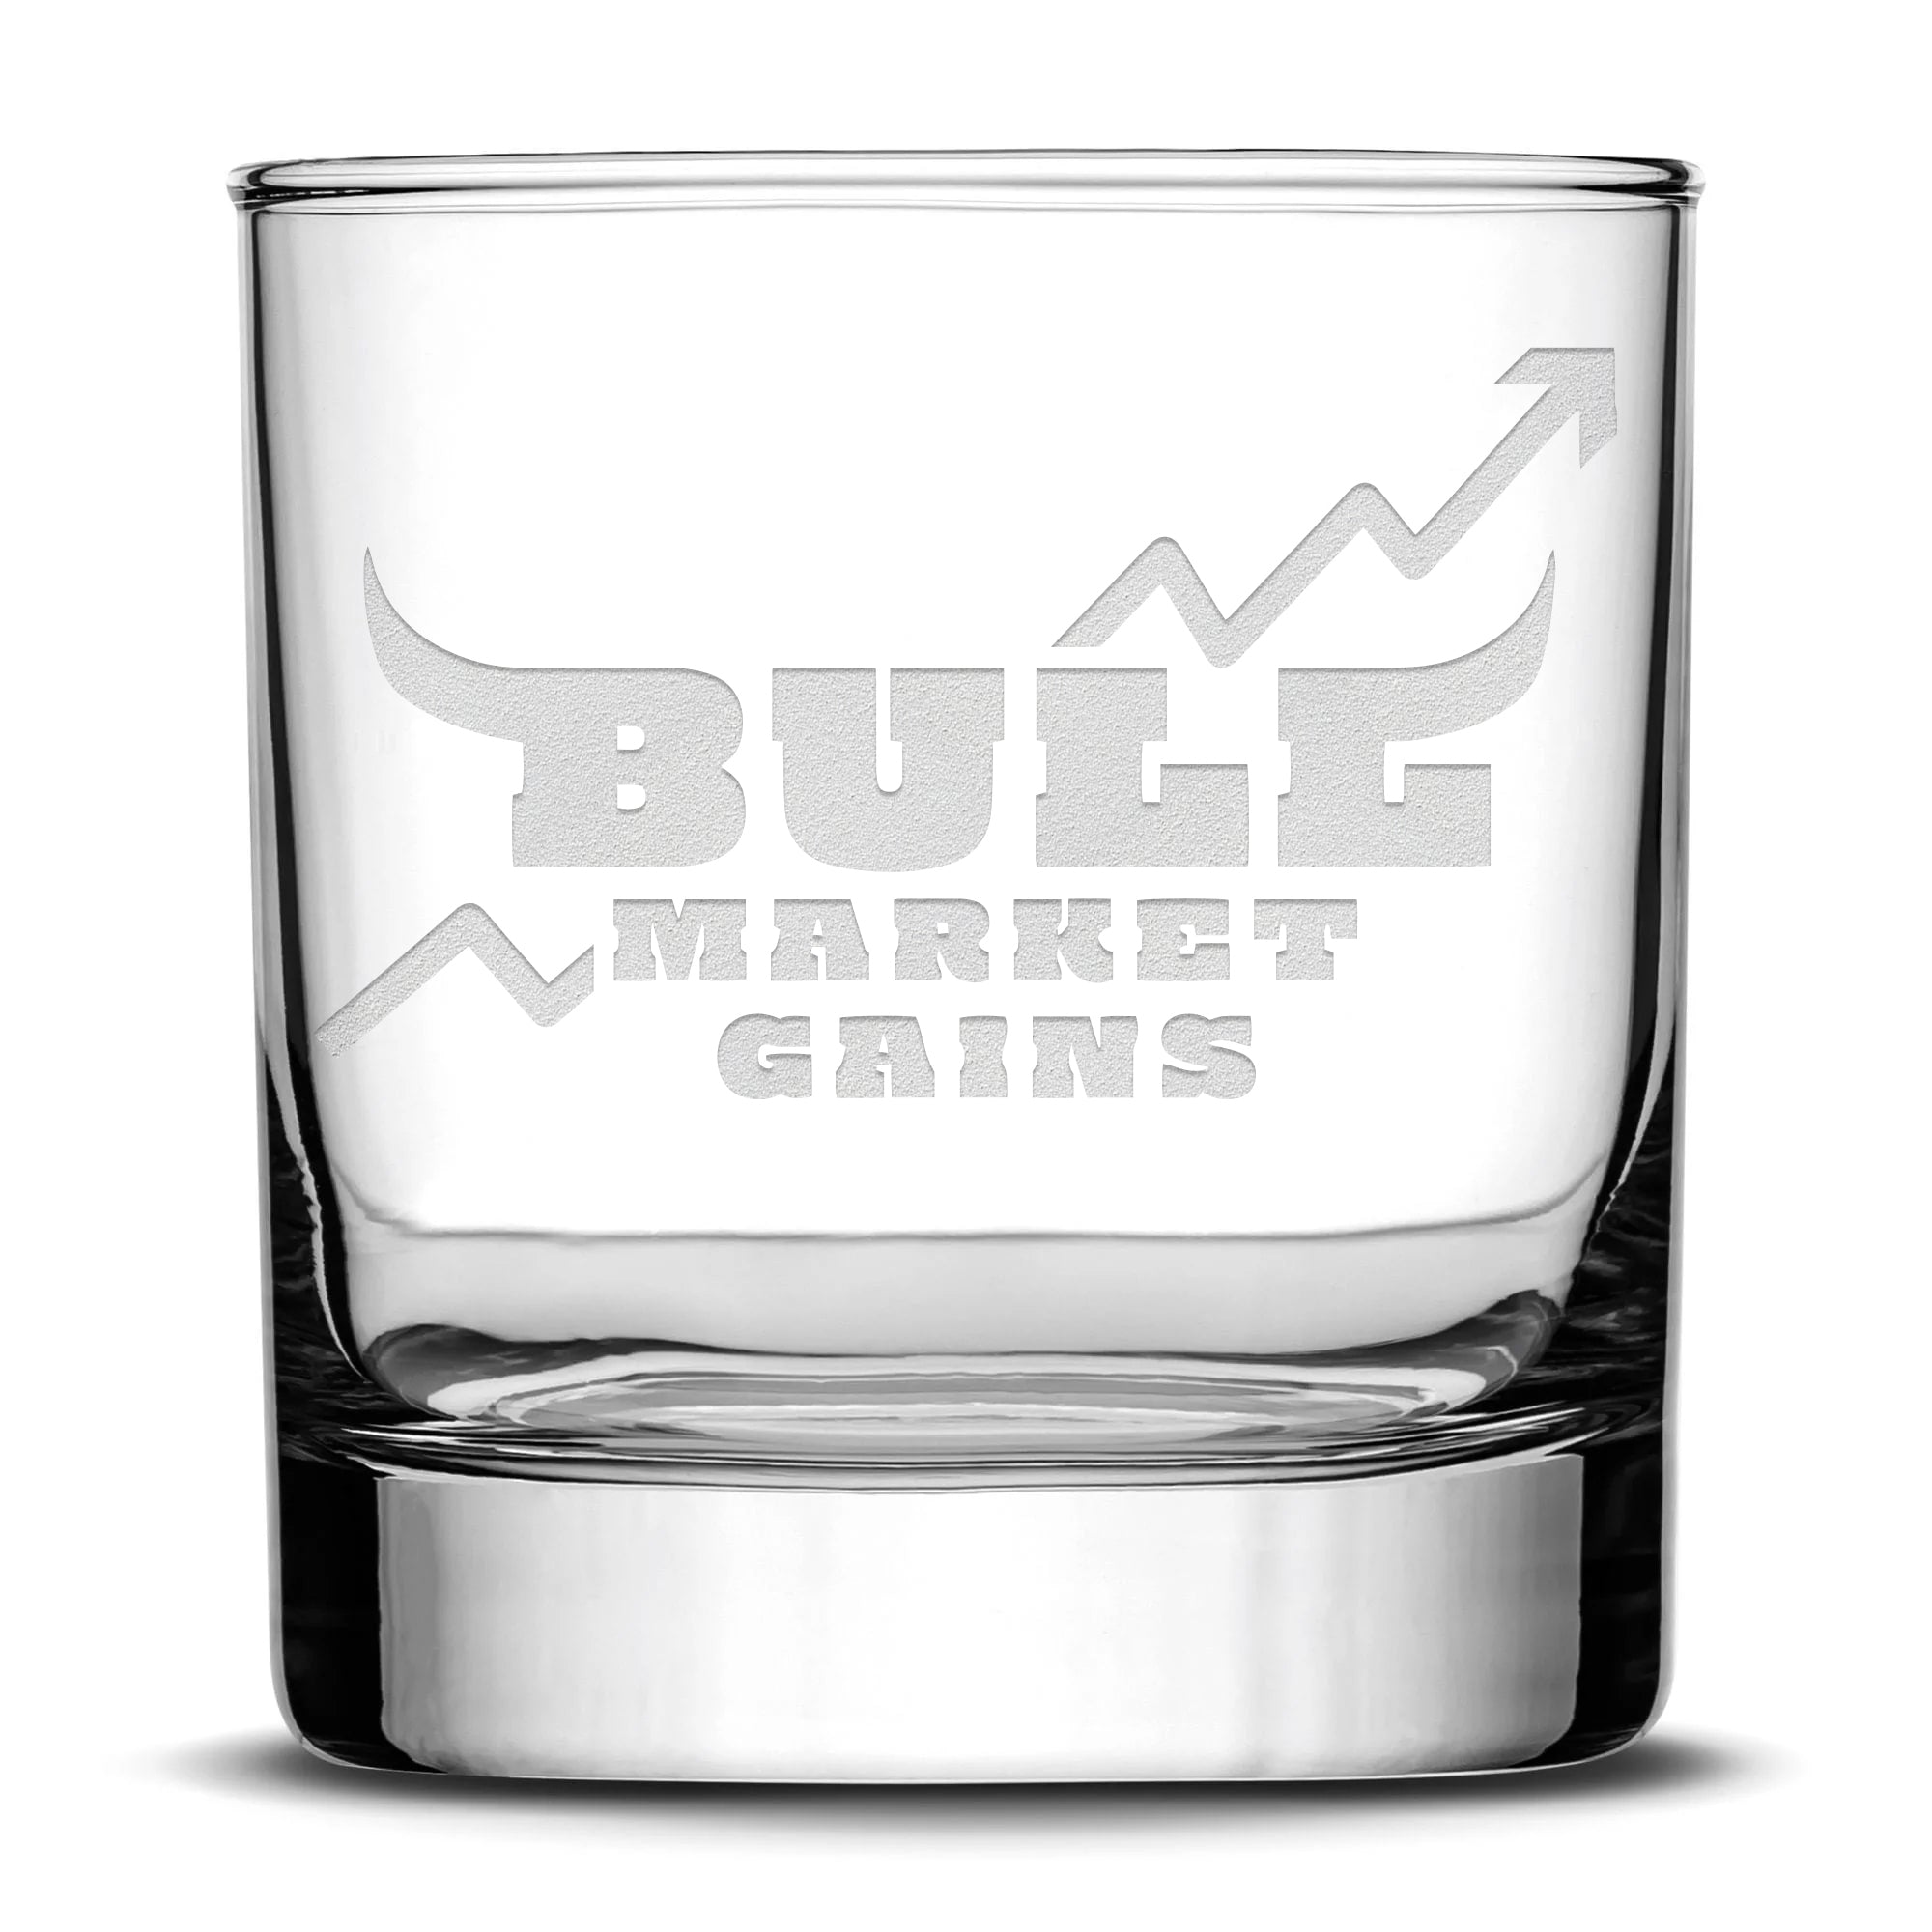 Integrity Bottles Premium, Bull Market Gains, Whiskey Glass, Hand Made in USA, Sand Etched, 11oz